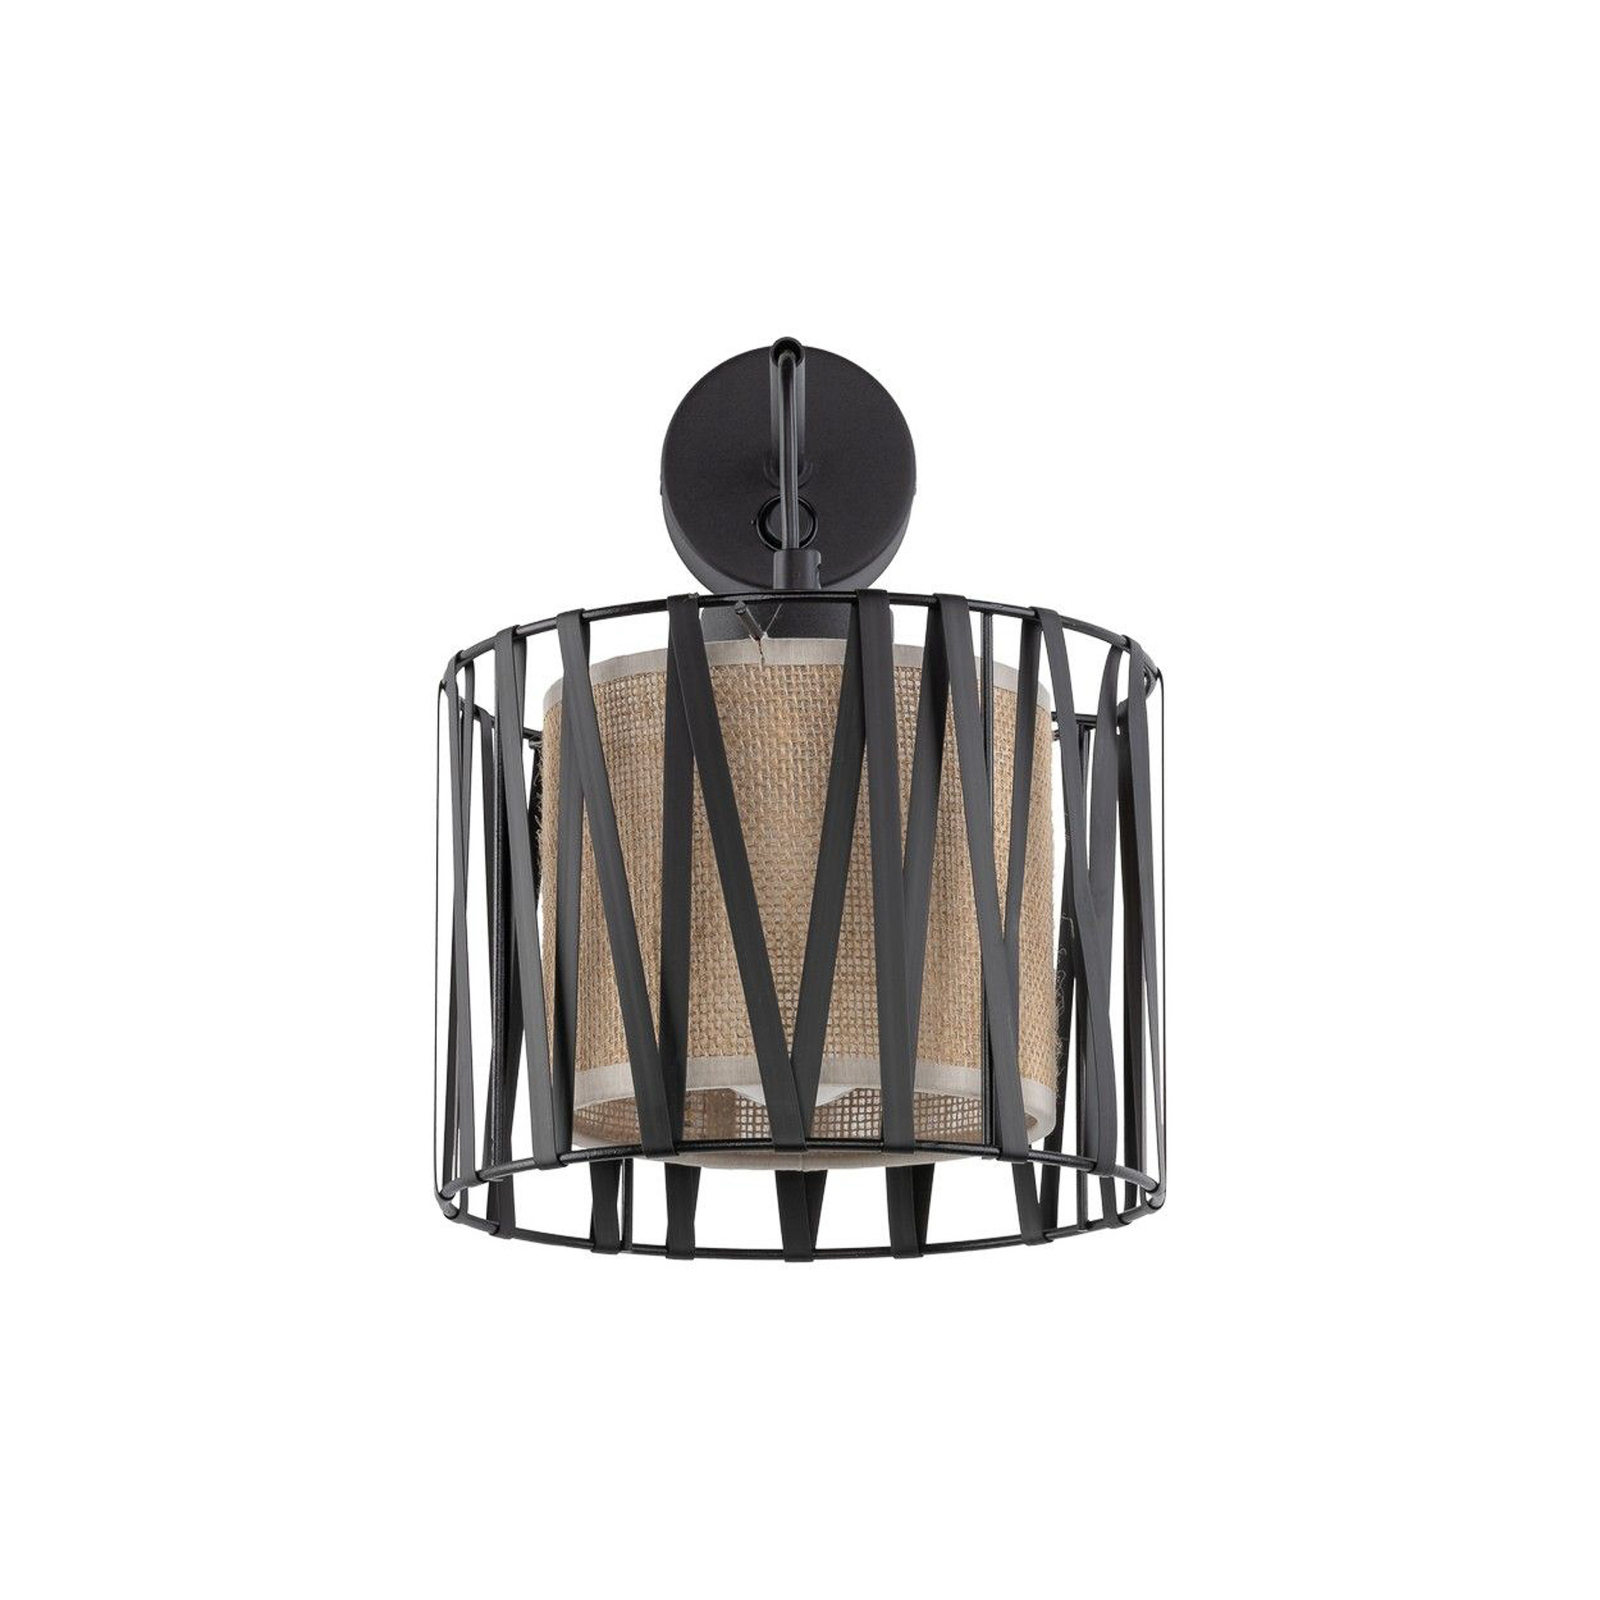 Harmony wall light, black, Jute Natur, with switch